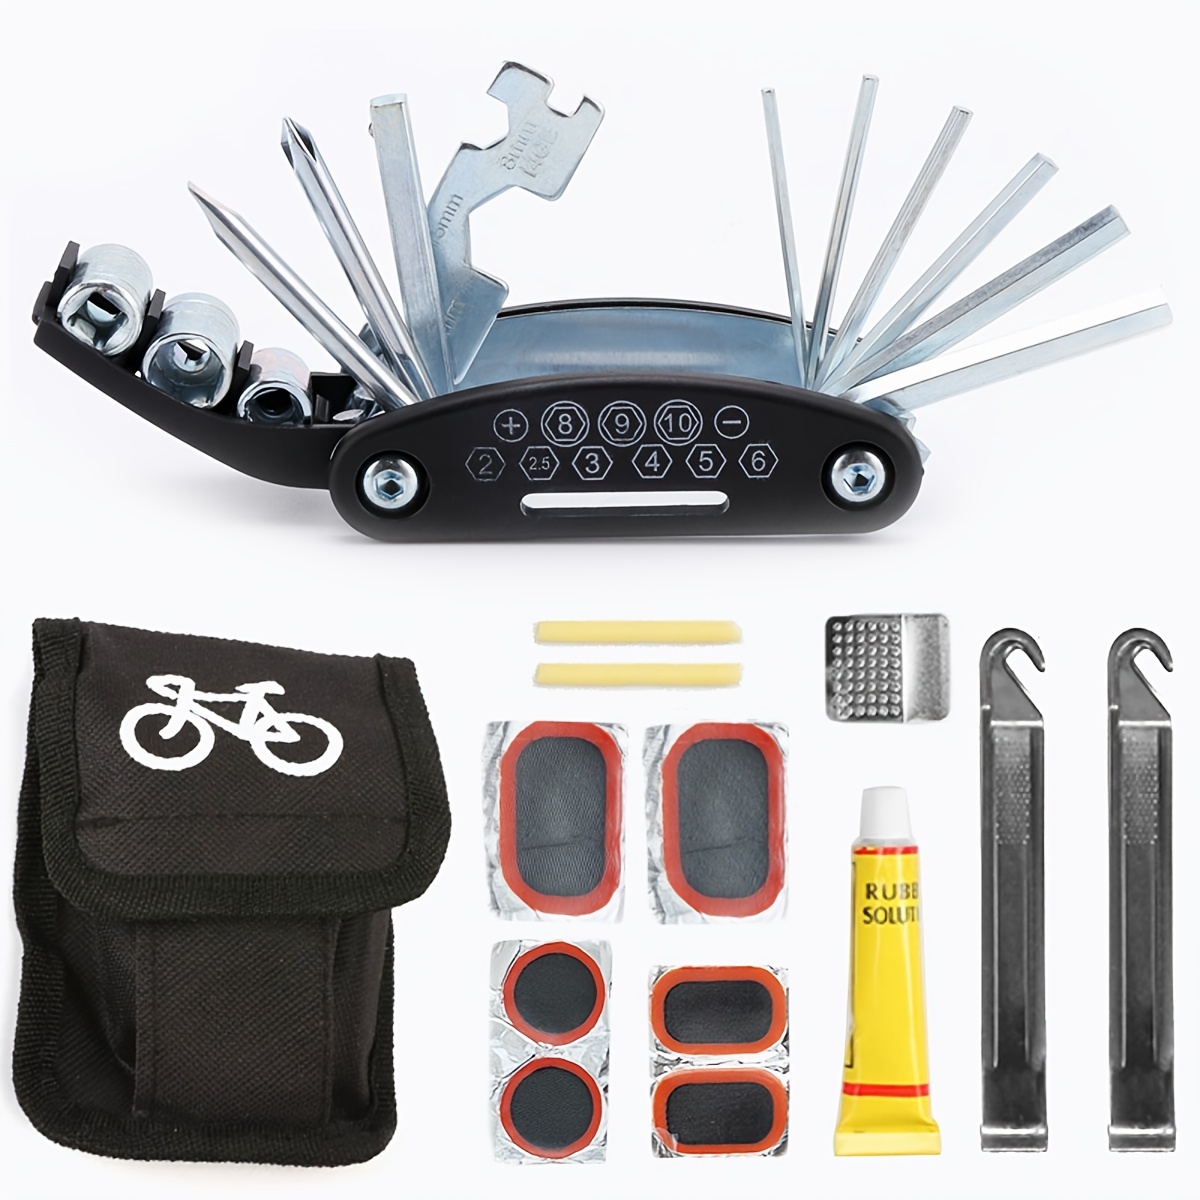 

16-in-1 Bike Repair Tool Kit With Tire Levers, Hex Spoke Wrench, And Multifunctional Accessories - Essential Set For Road And Mountain Bikes